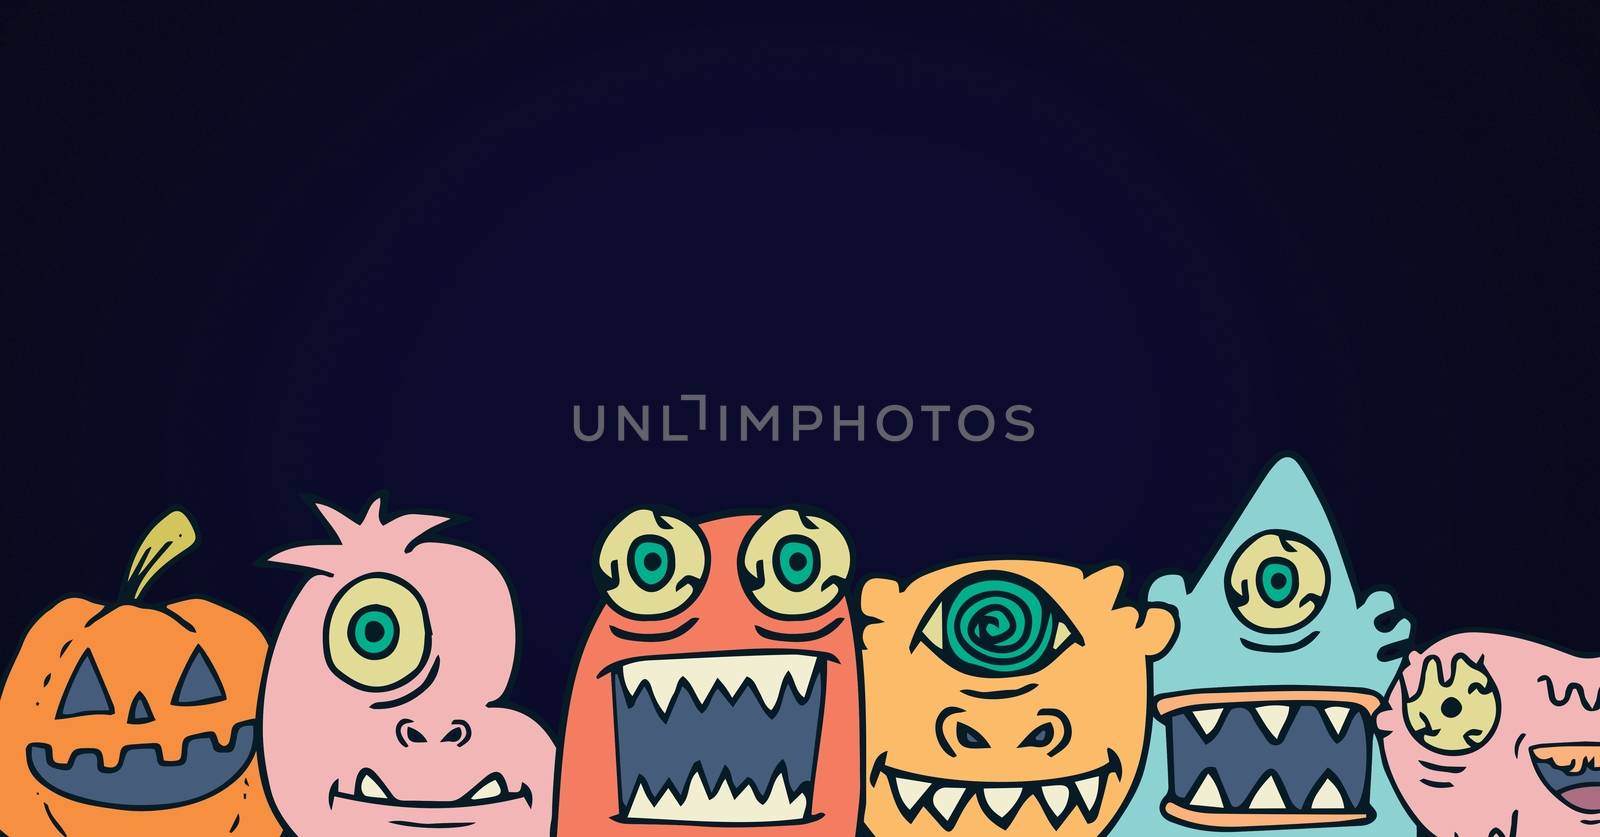 Monster halloween heads illustrations in a row by Wavebreakmedia